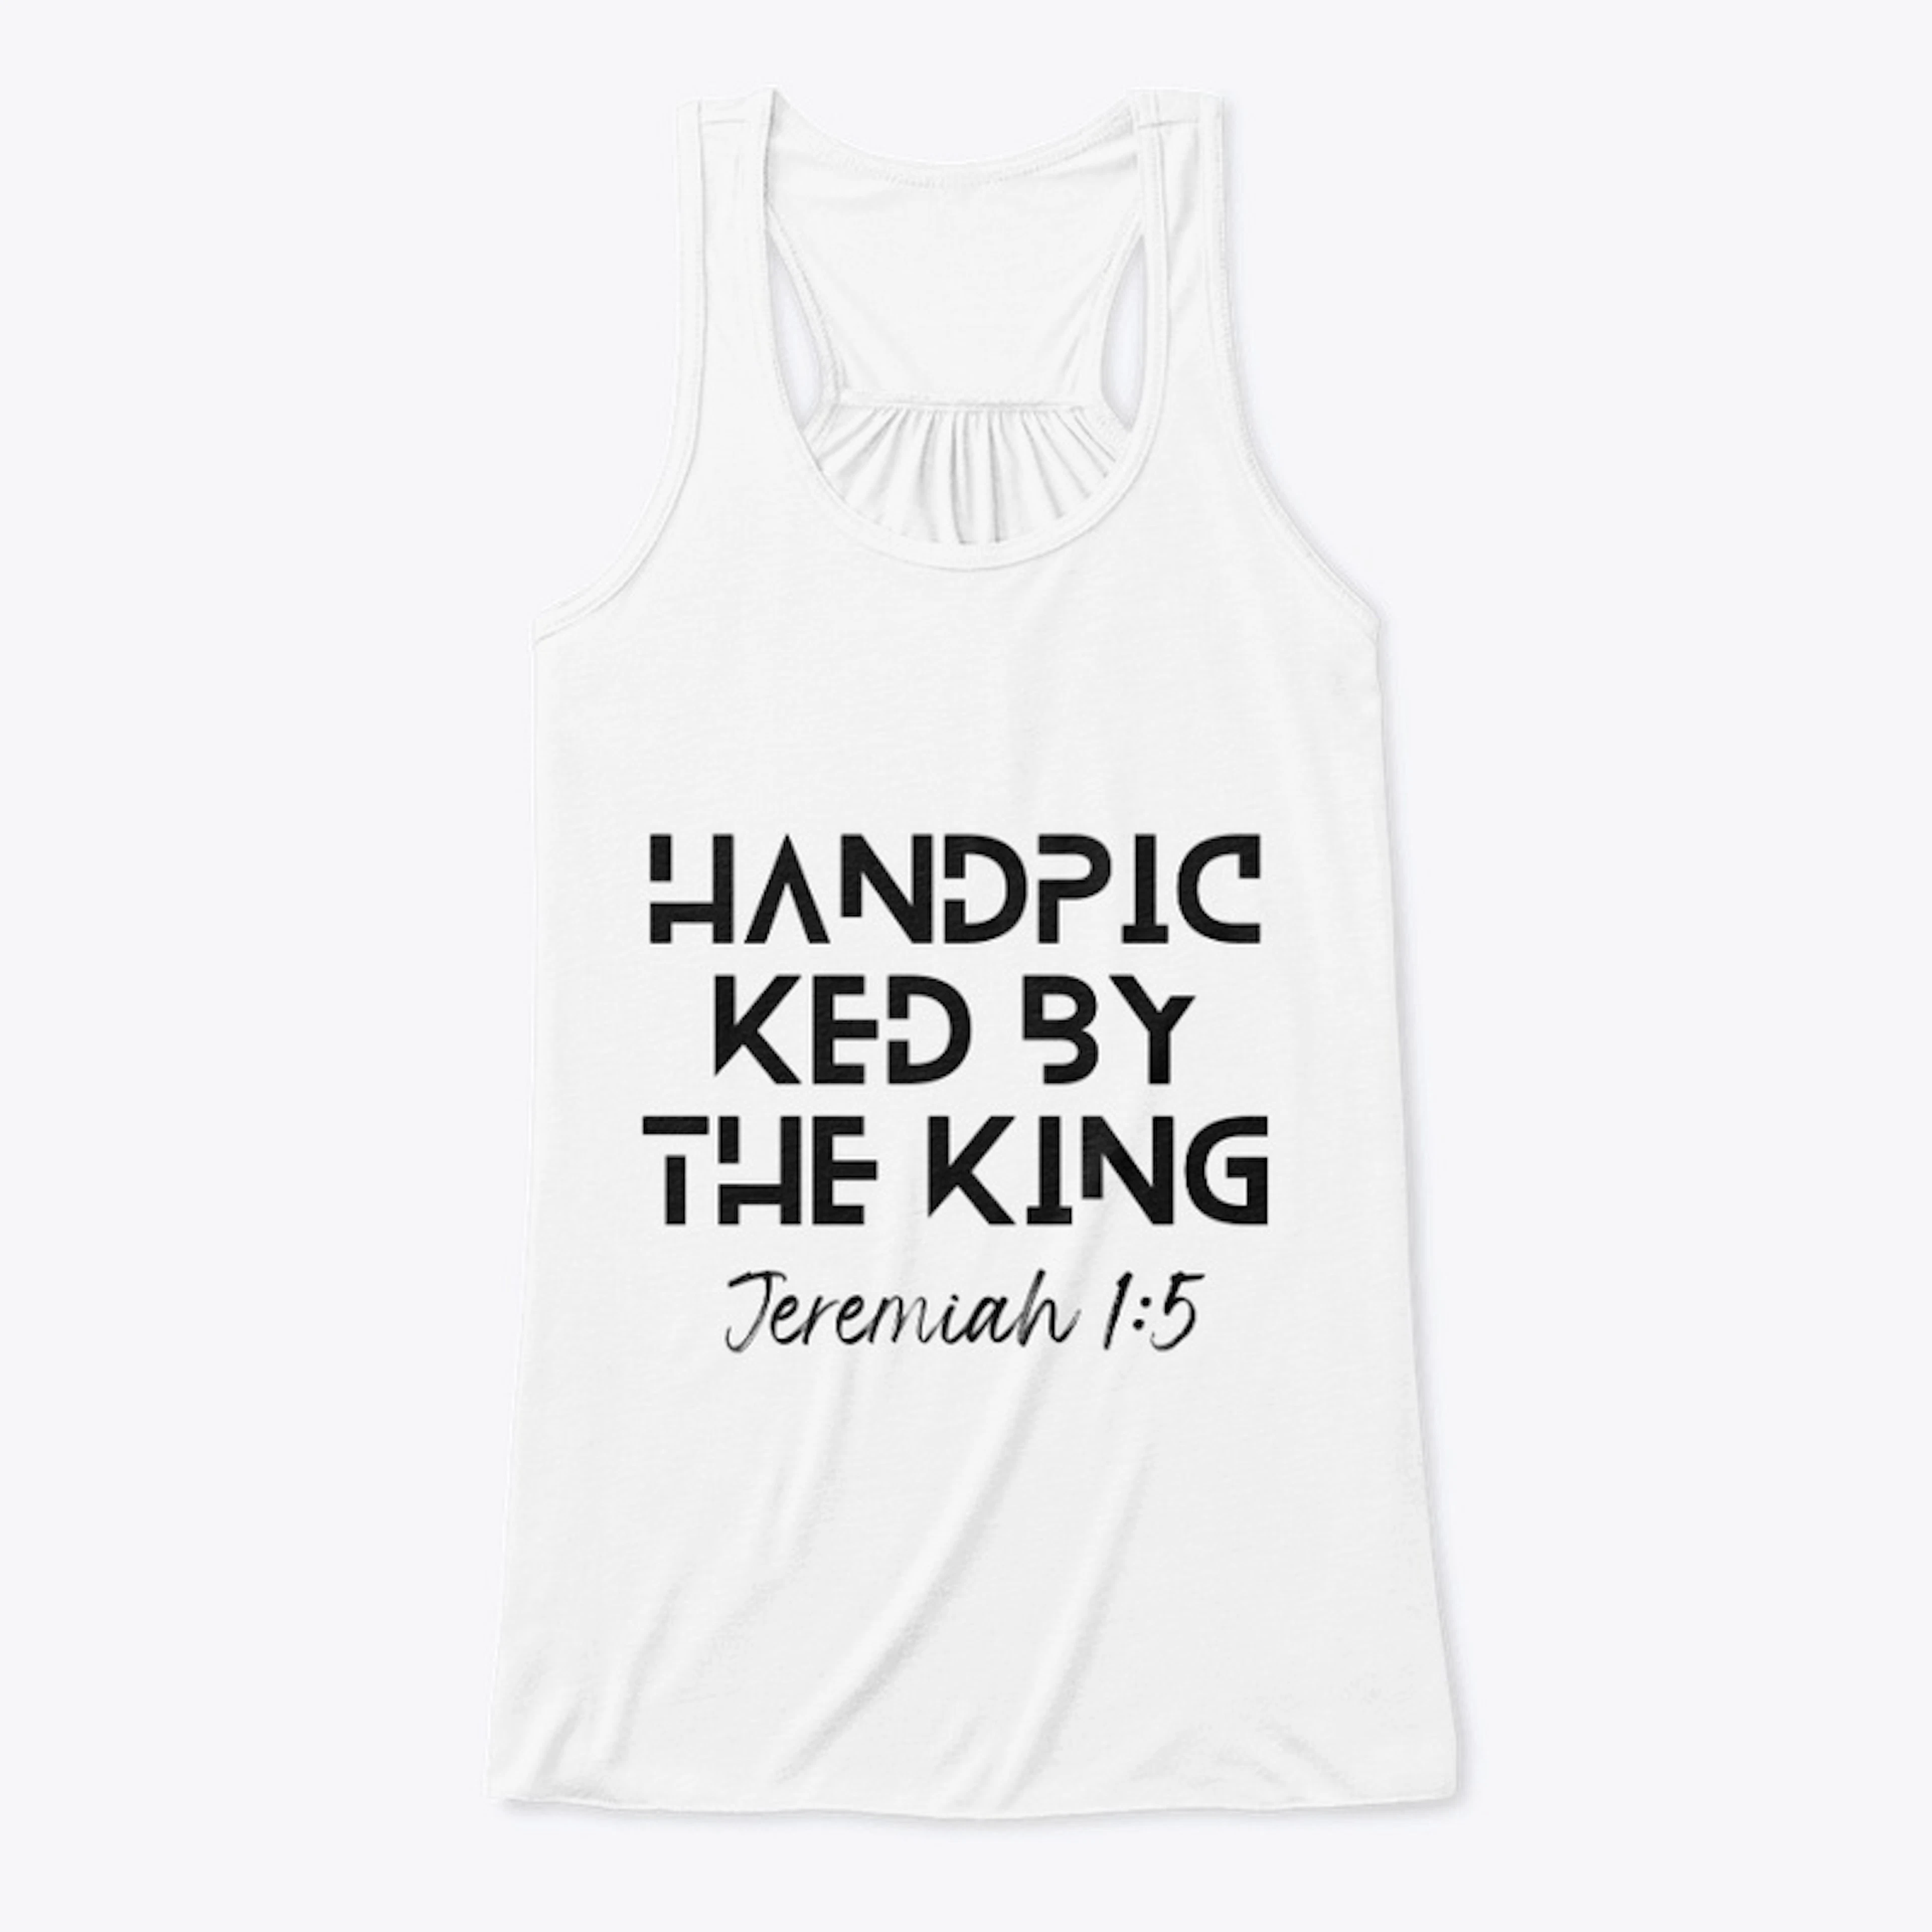 Handpicked by the king